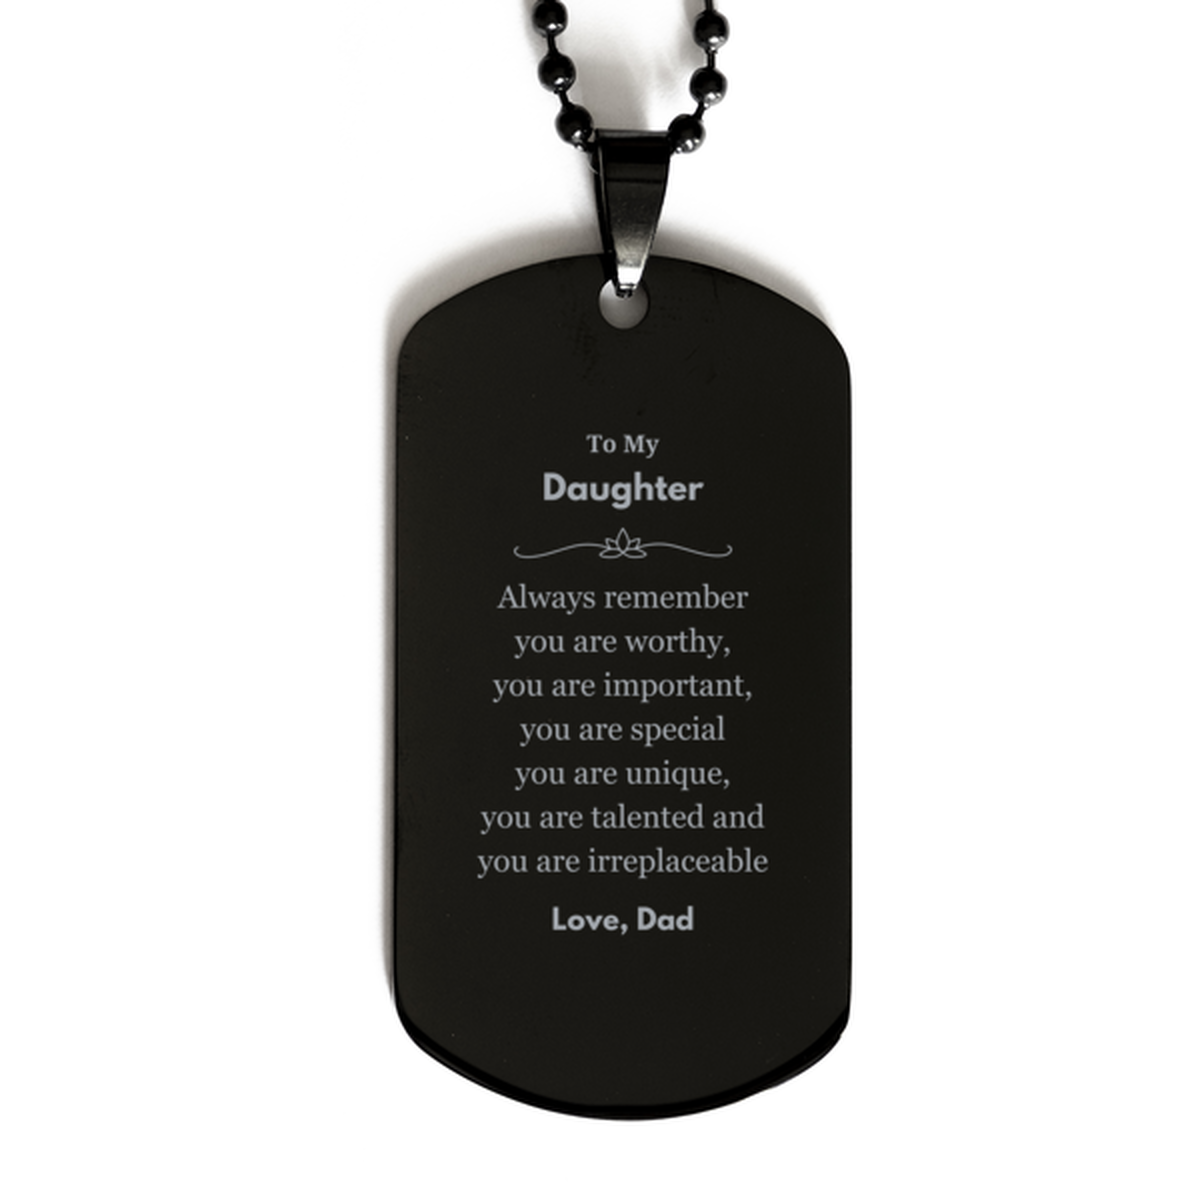 Daughter Birthday Gifts from Dad, Inspirational Black Dog Tag for Daughter Christmas Graduation Gifts for Daughter Always remember you are worthy, you are important. Love, Dad